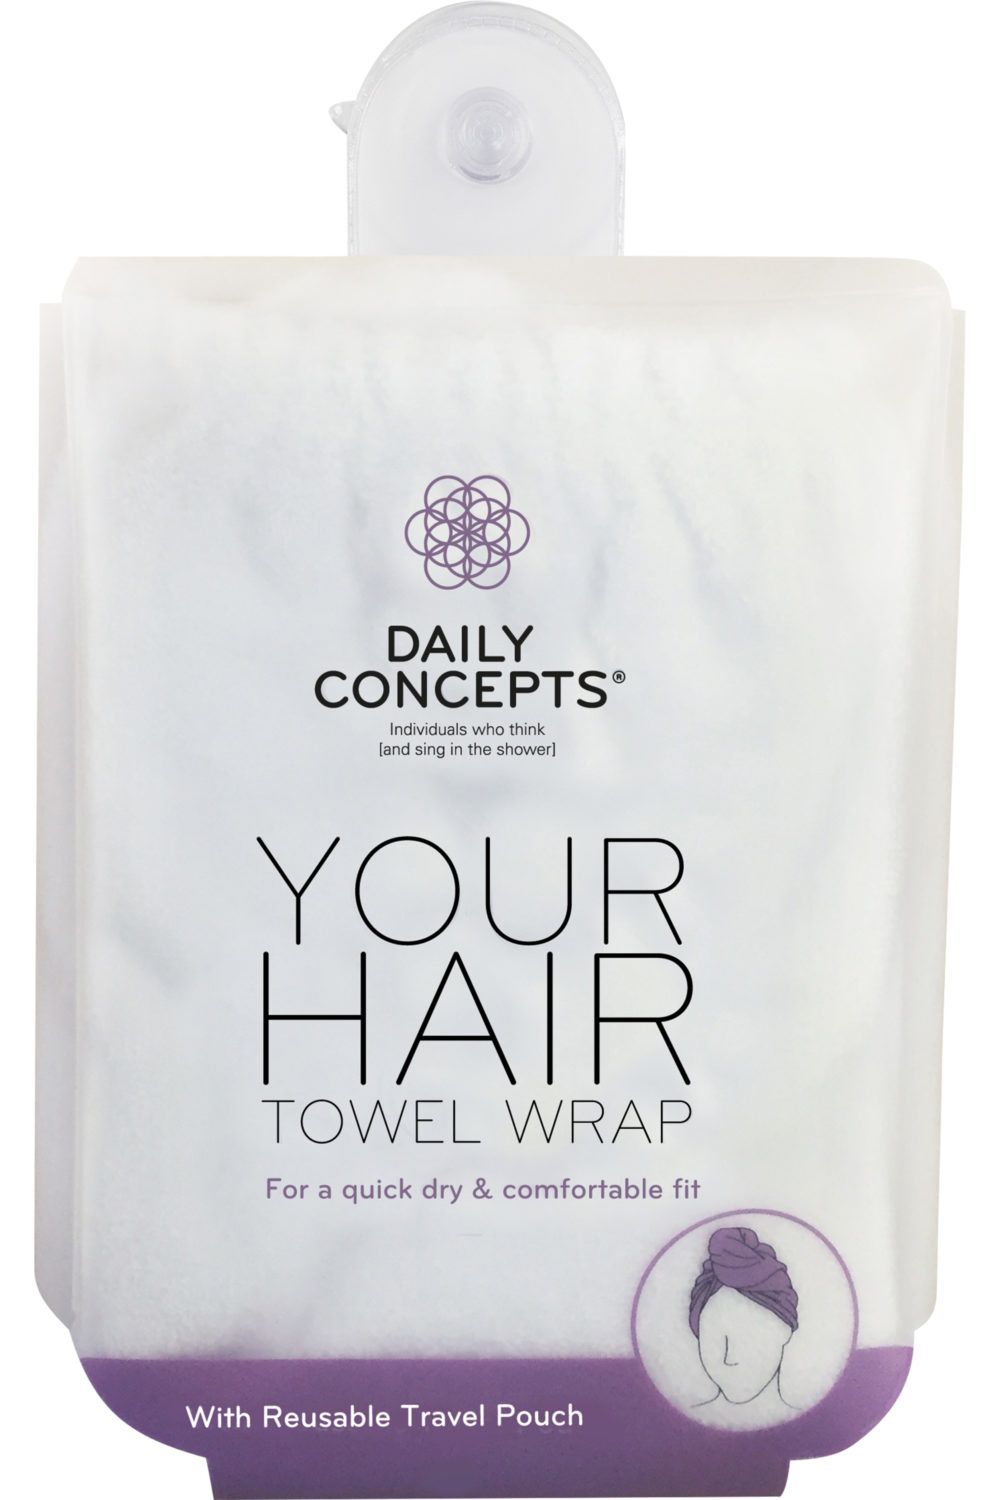 Daily Concepts - Your Hair Towel Wrap